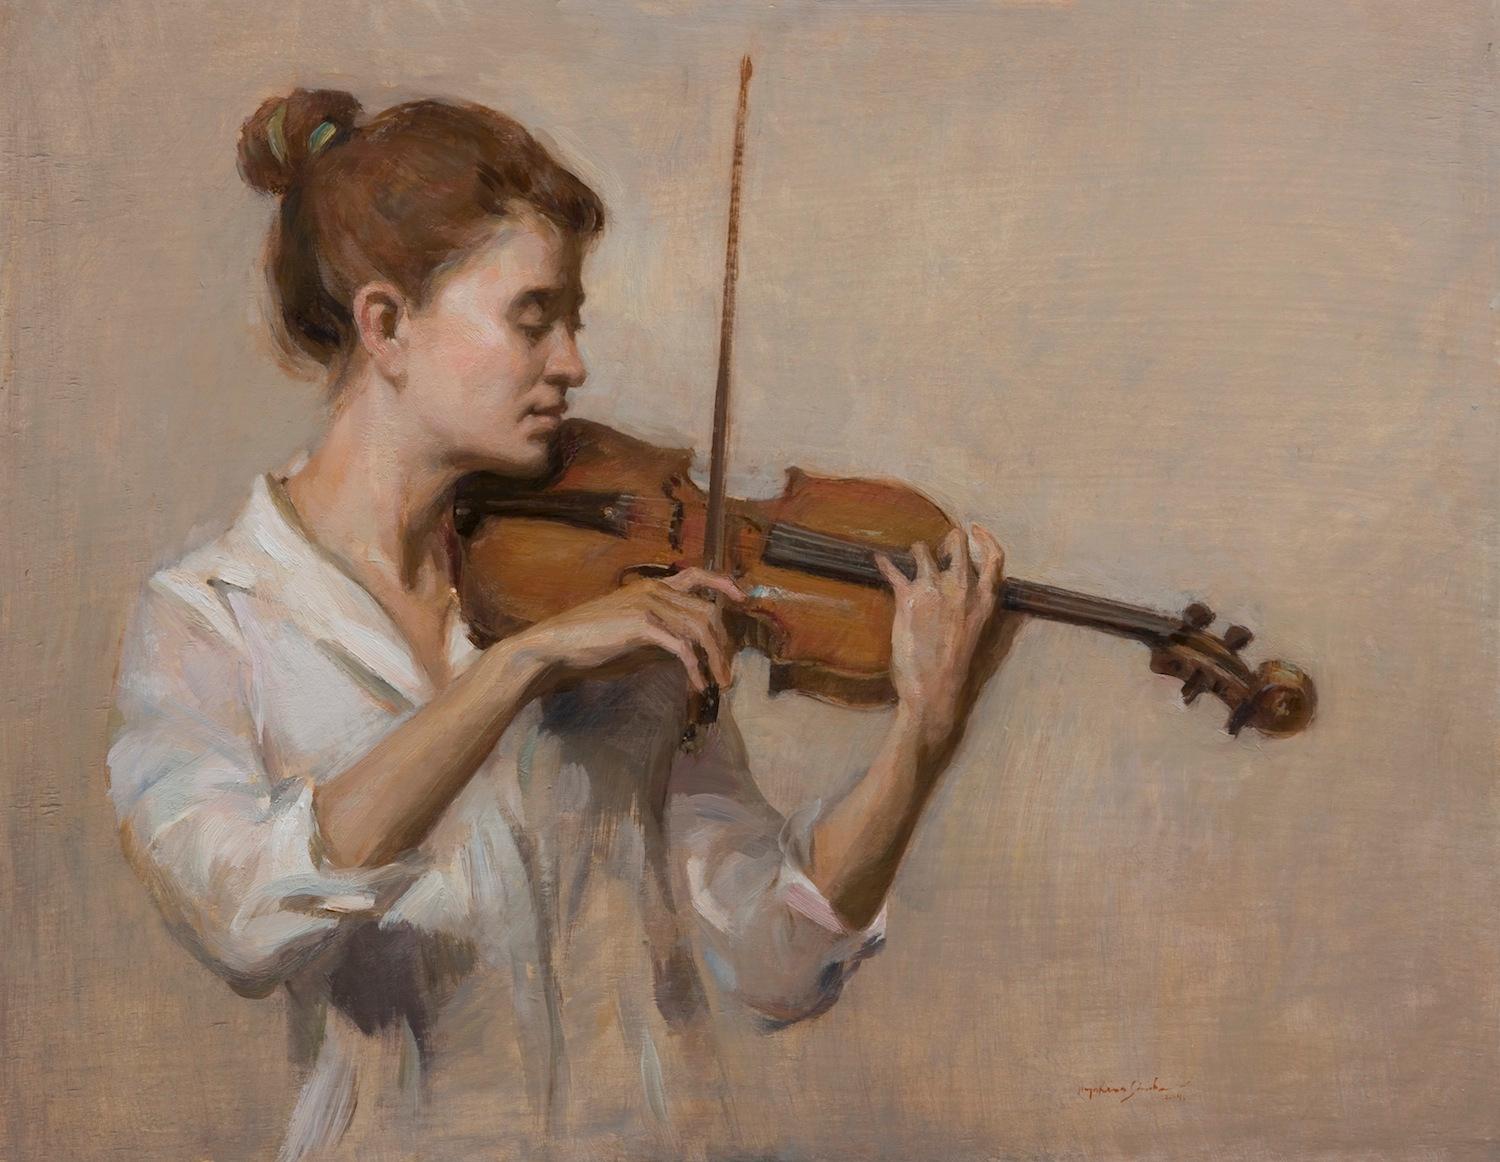 Cadenza , Figurative, Oil on Panel, Style of Classical Realism. Florence Academy